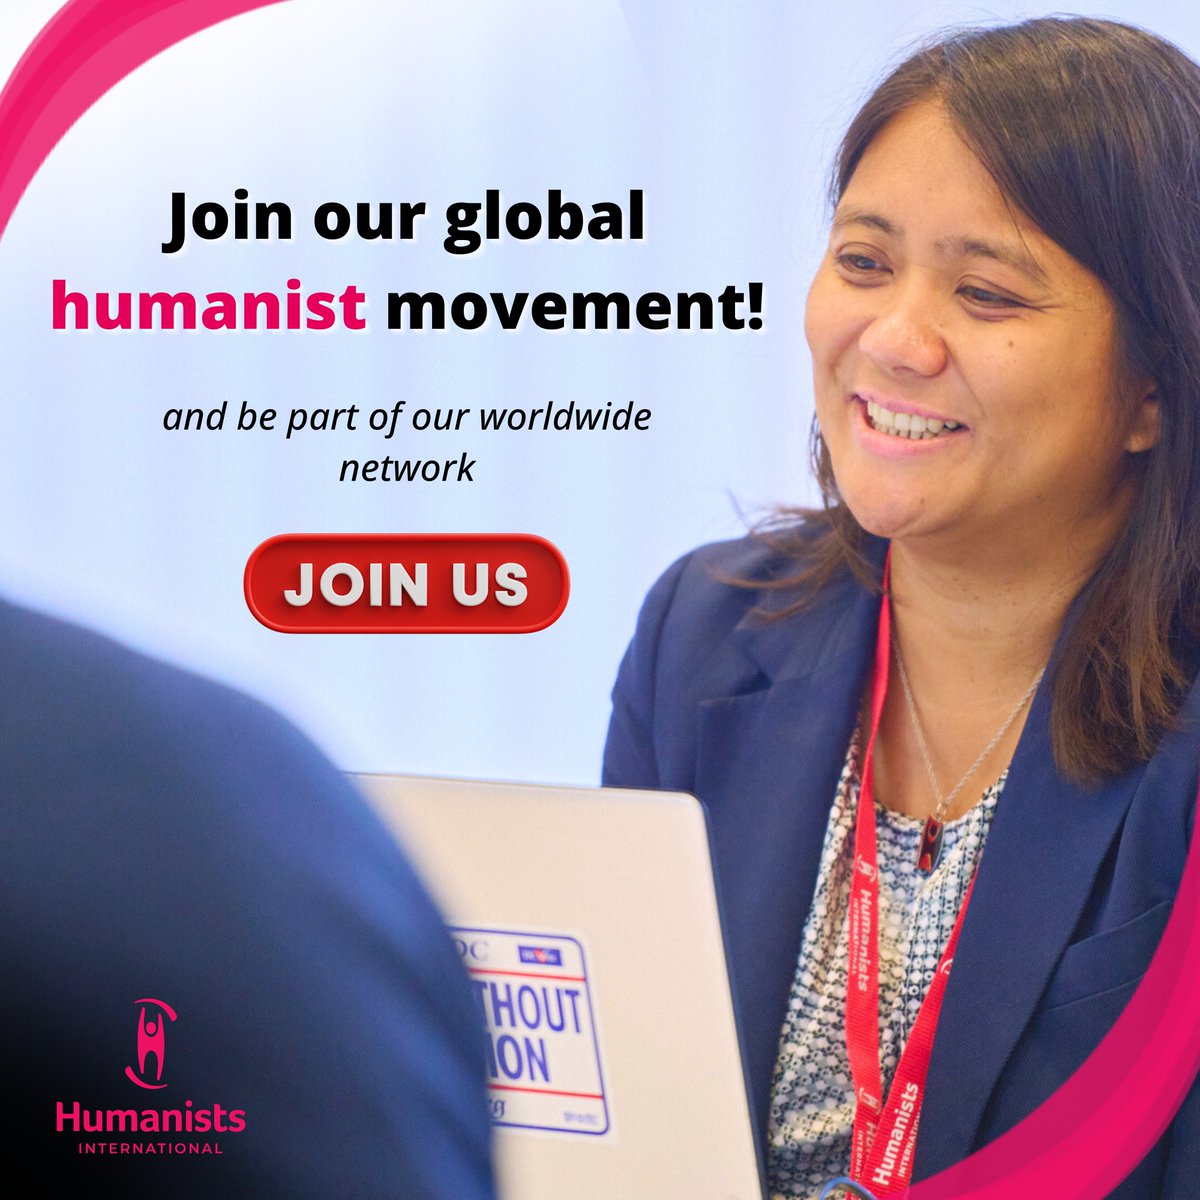 Stand with us in promoting compassion, reason, and human rights worldwide. Join our global humanist movement as a member organization today! humanists.international/join/ humanists.international/join/ humanists.international/join/